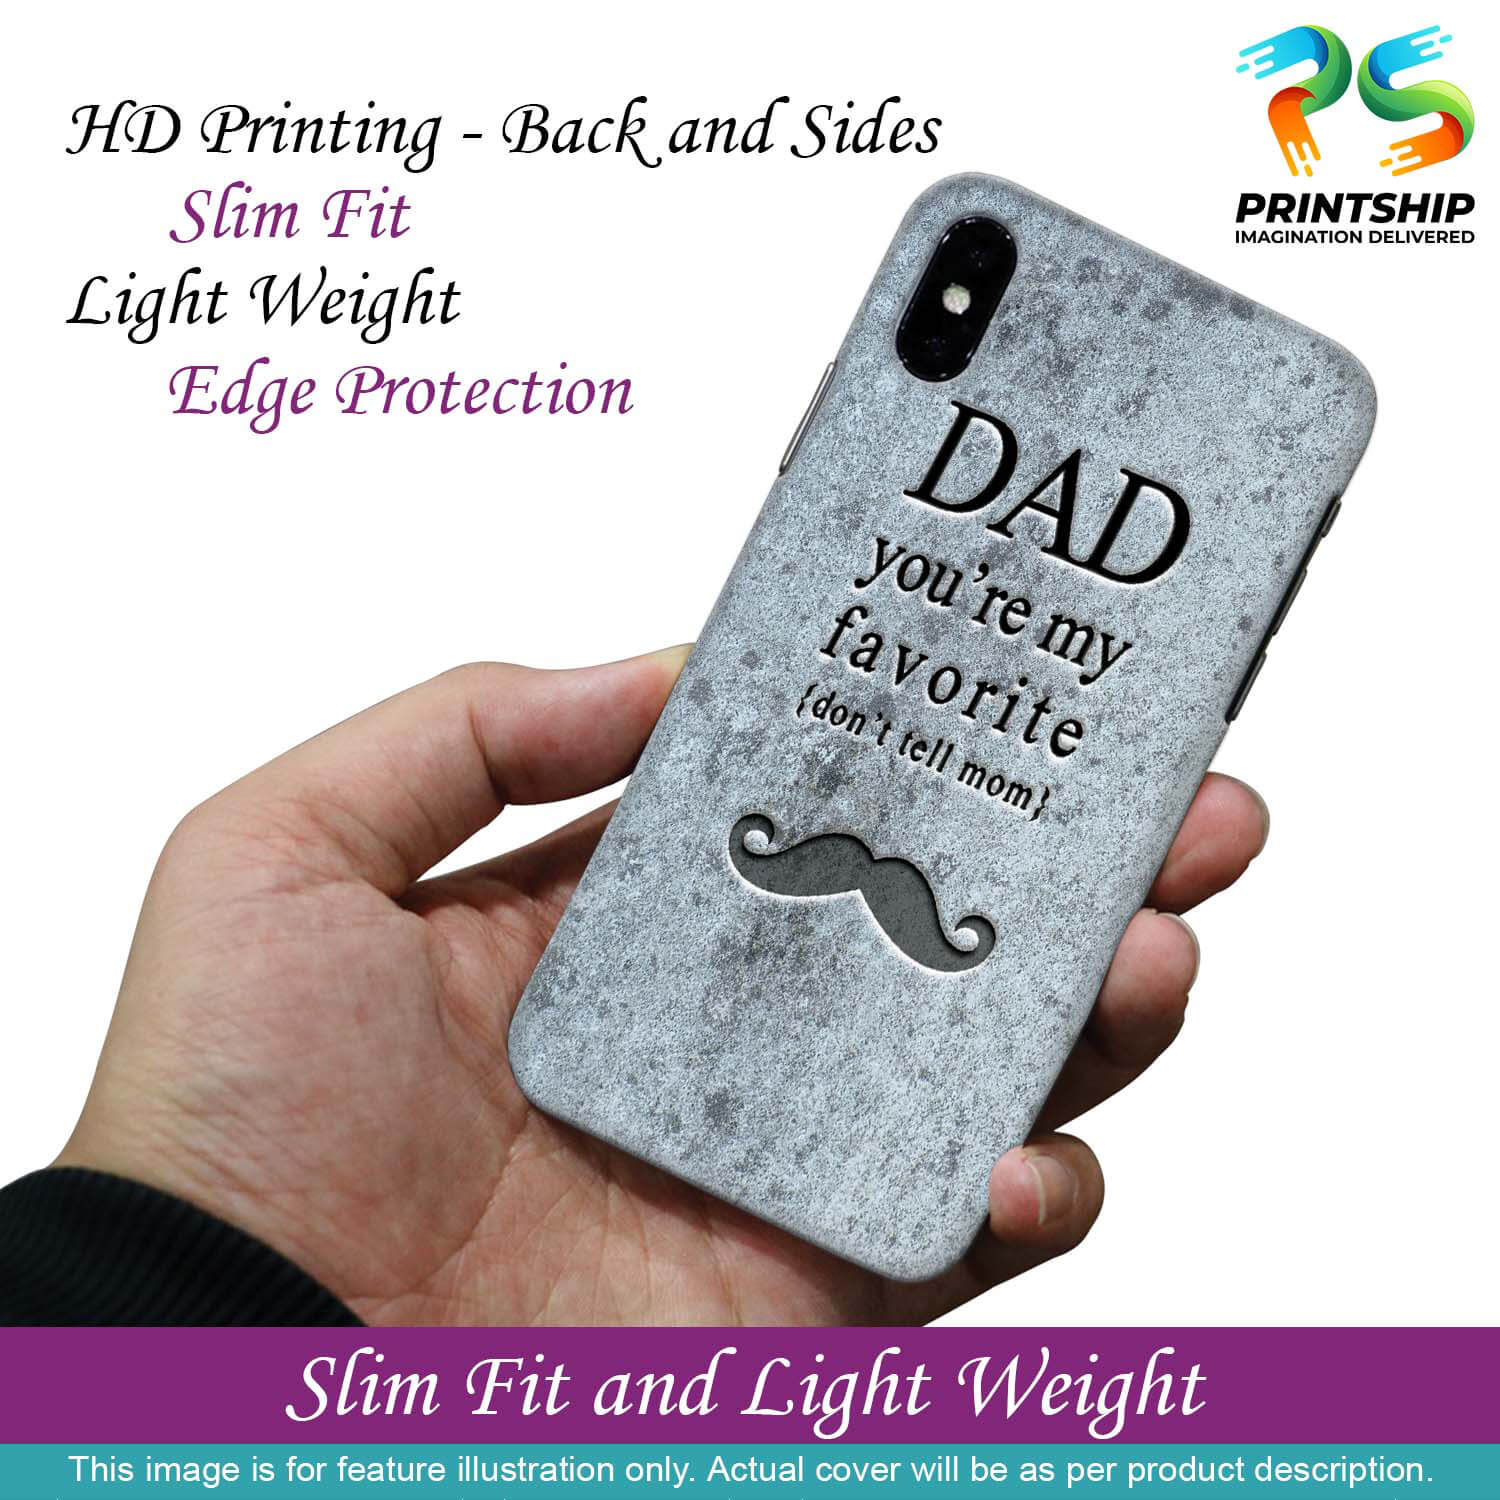 G0037-Dad You're my Favourite Back Cover for Honor 9X Pro